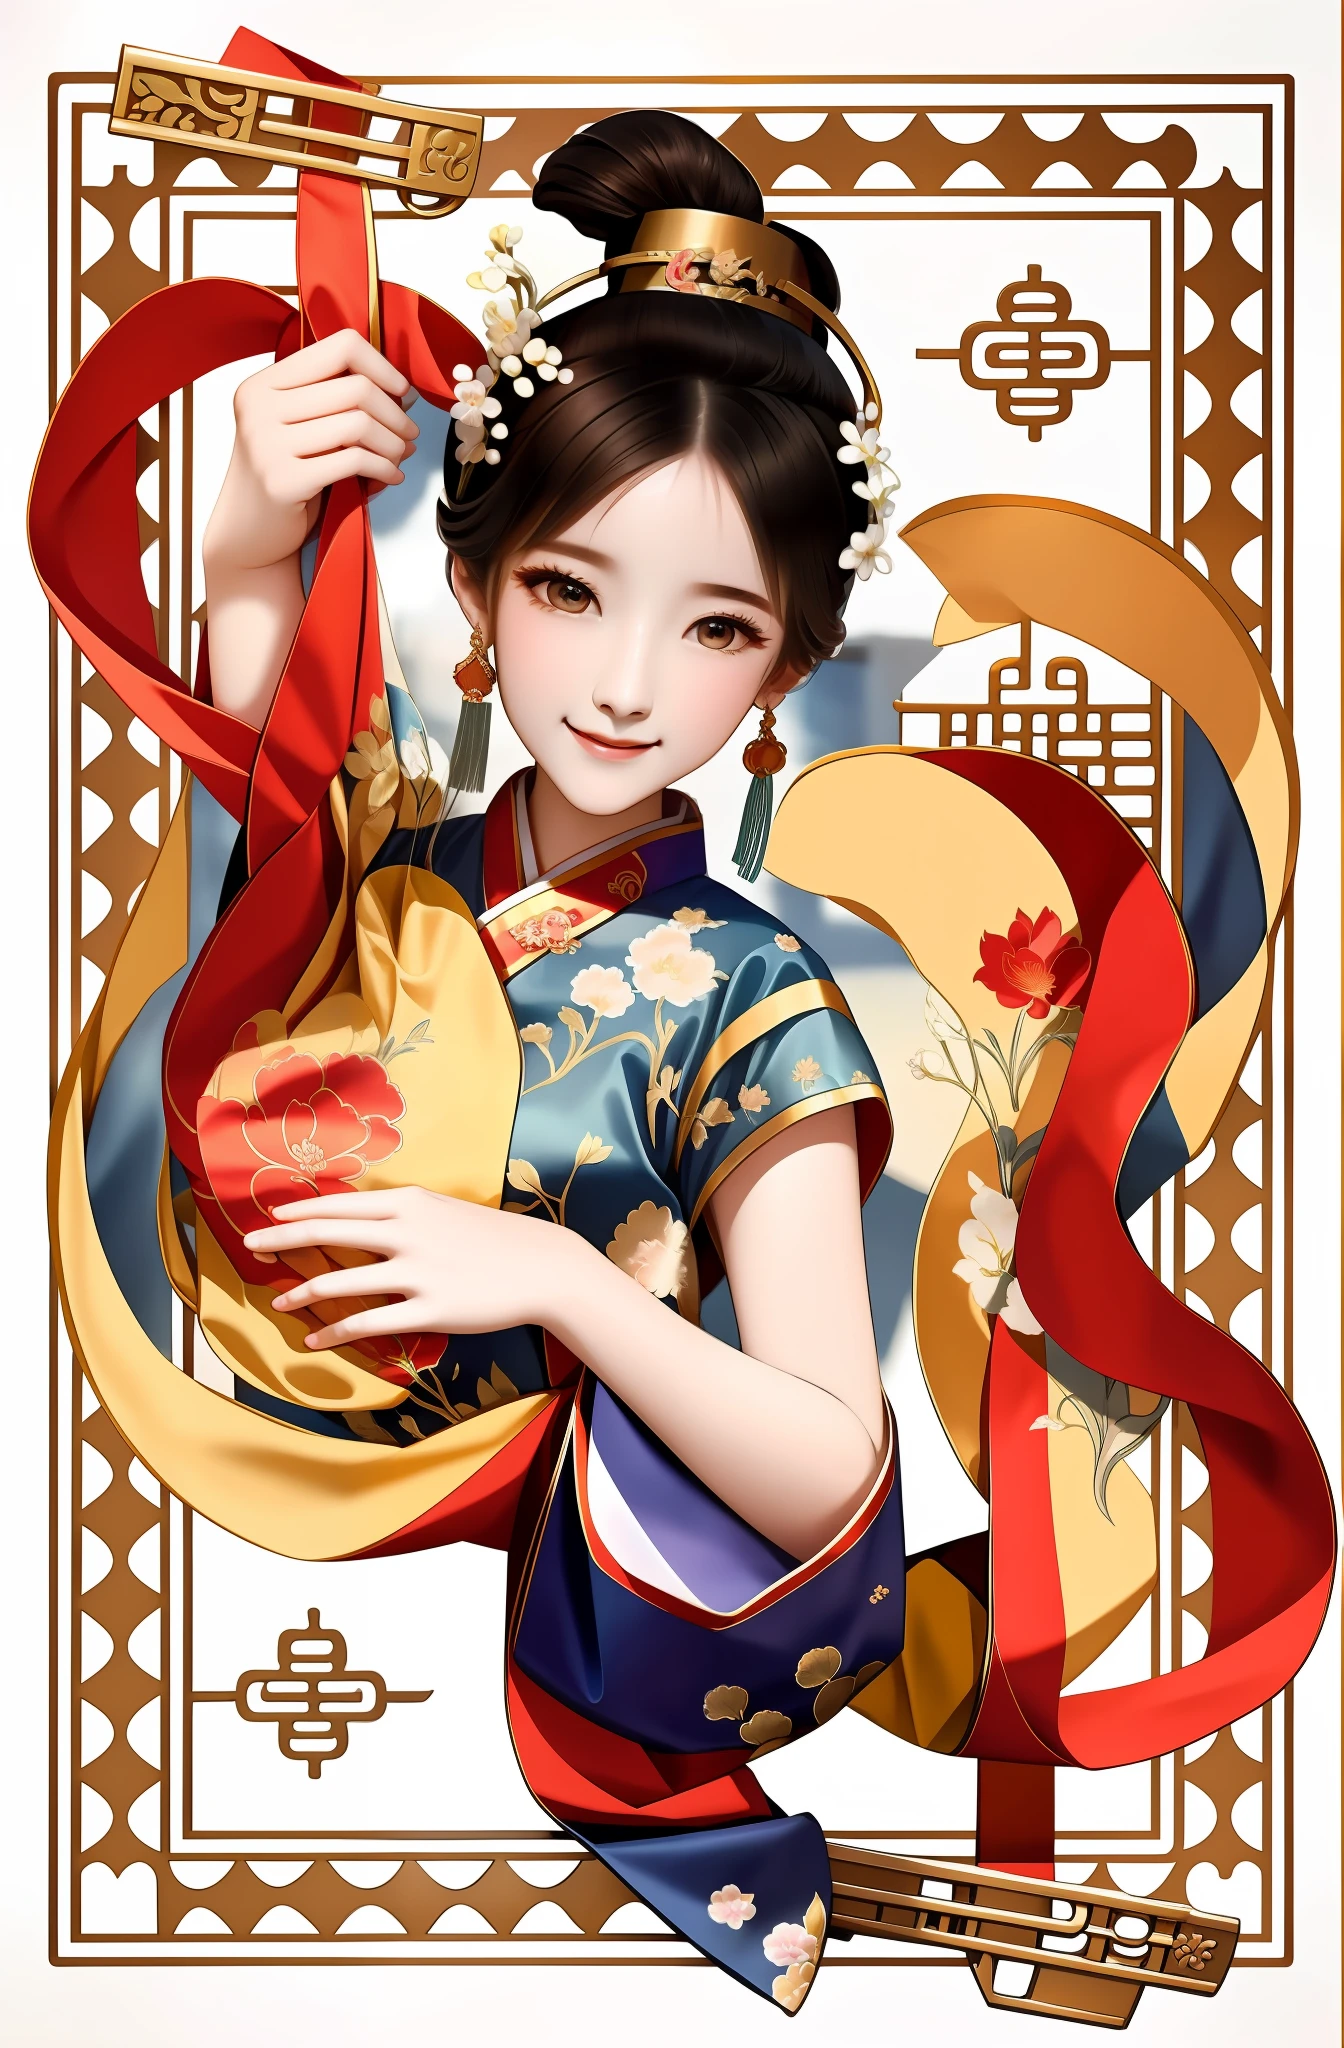 Close-up of a woman holding an instrument, Palace ， A girl in Hanfu, A beautiful artwork illustration, ancient chinese beauti, inspired by Wu Bin, Princesa chinesa antiga, Chinese girl, Inspired by Song Maojin, ancient china art style, inspired by Gong Xian, Guviz-style artwork, inspired by Park Hua